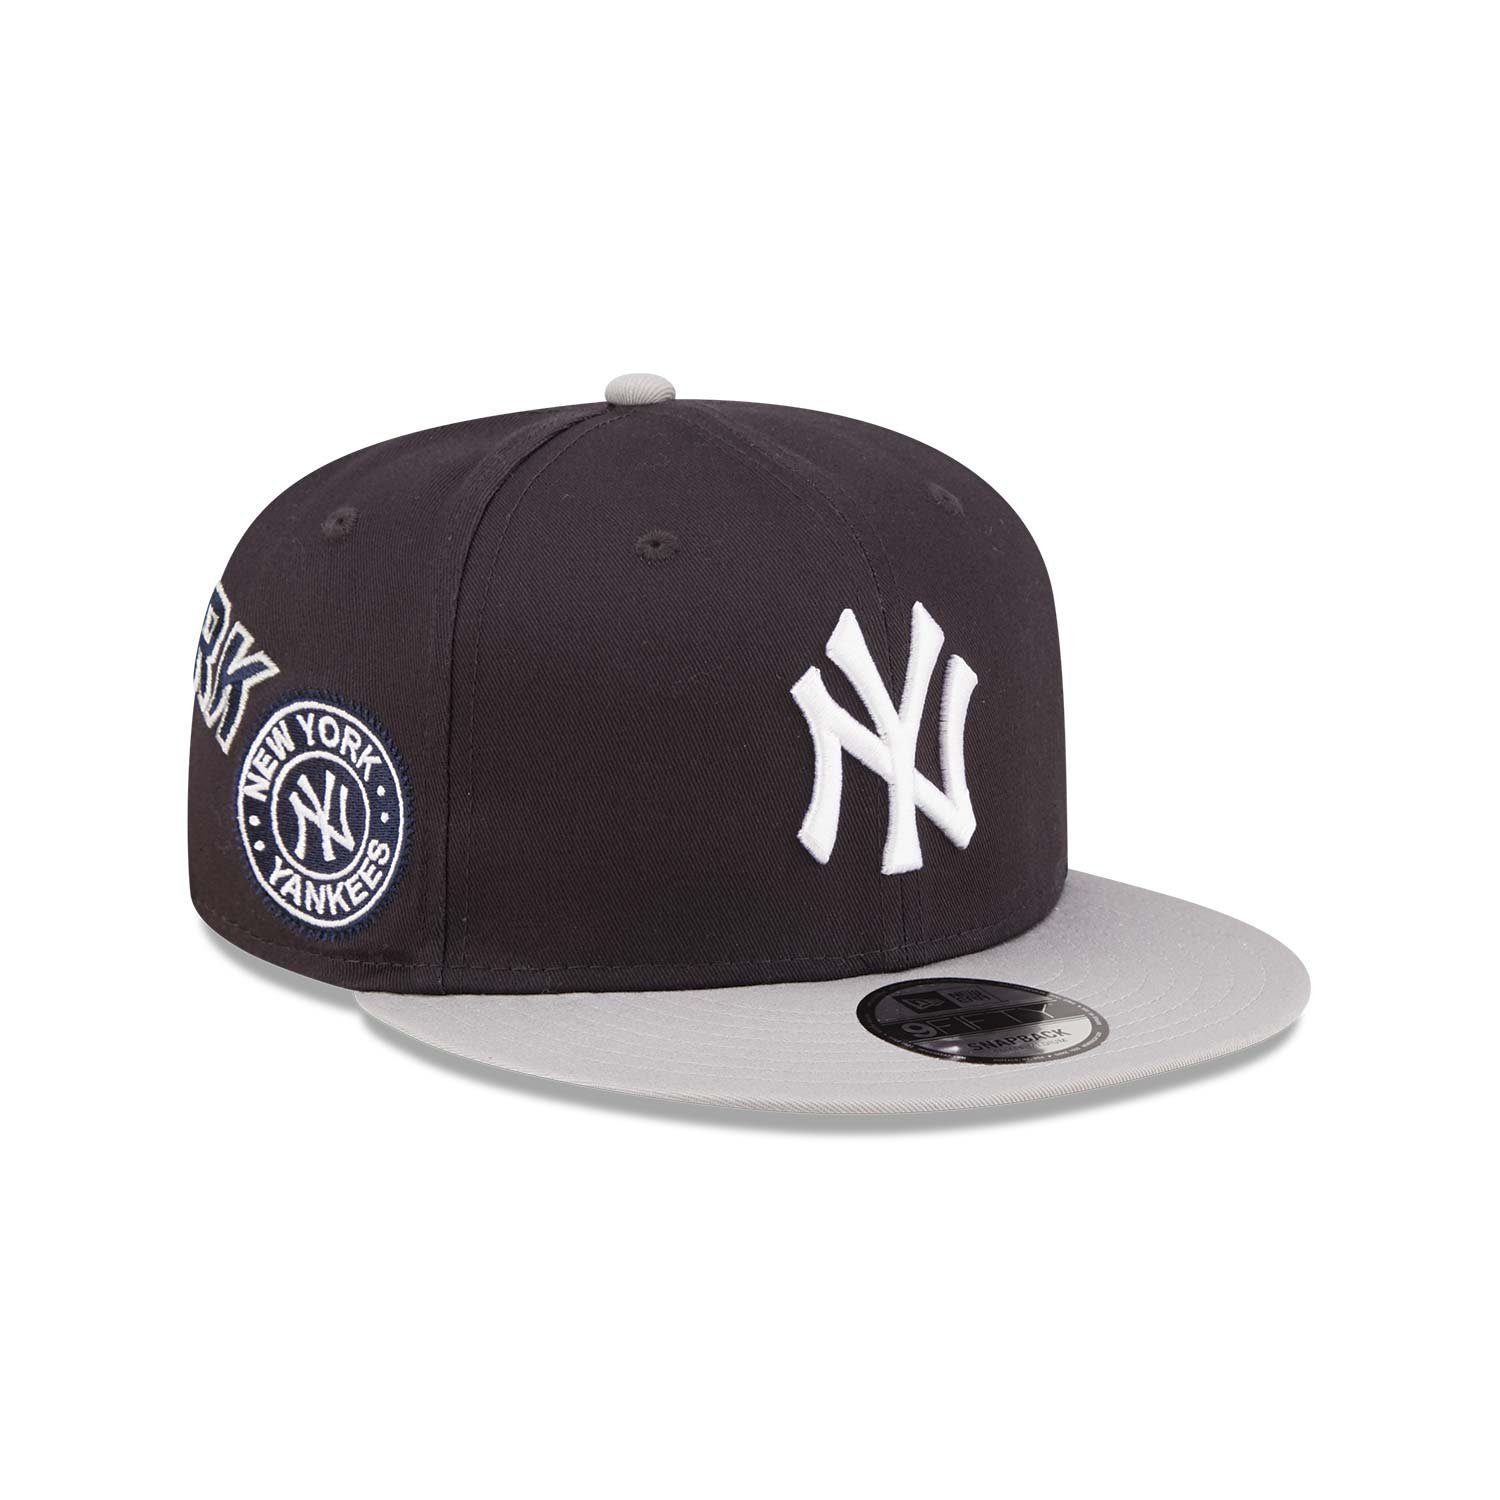 New Era 9FIFTY York Patches Baseball Cap Over All Yankees New